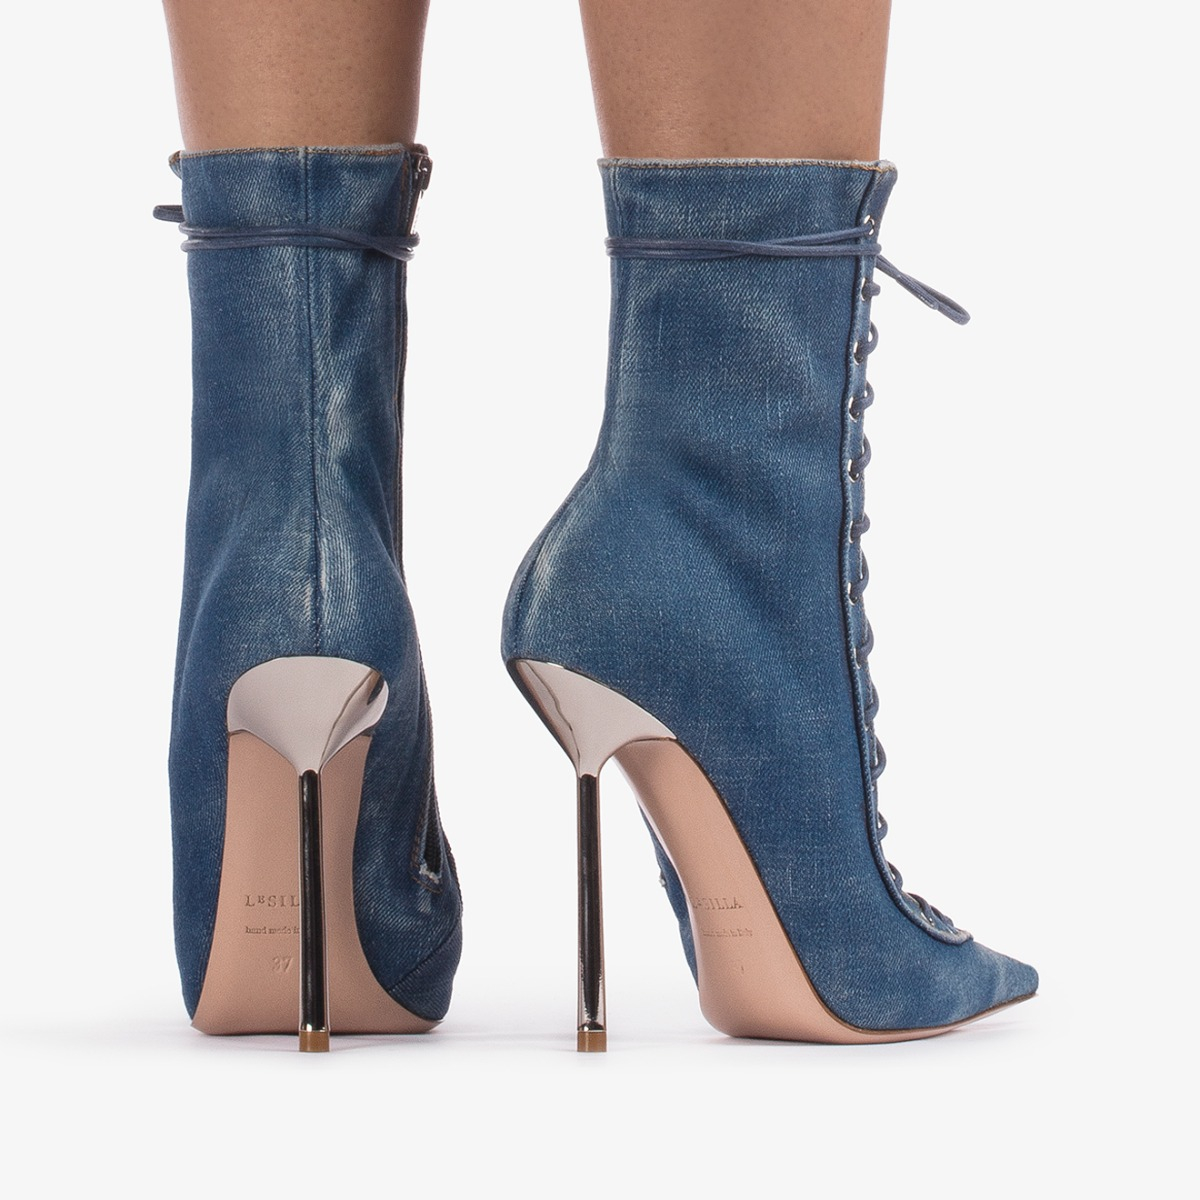 COLETTE ANKLE BOOT 120 mm - Le Silla | Official Online Store